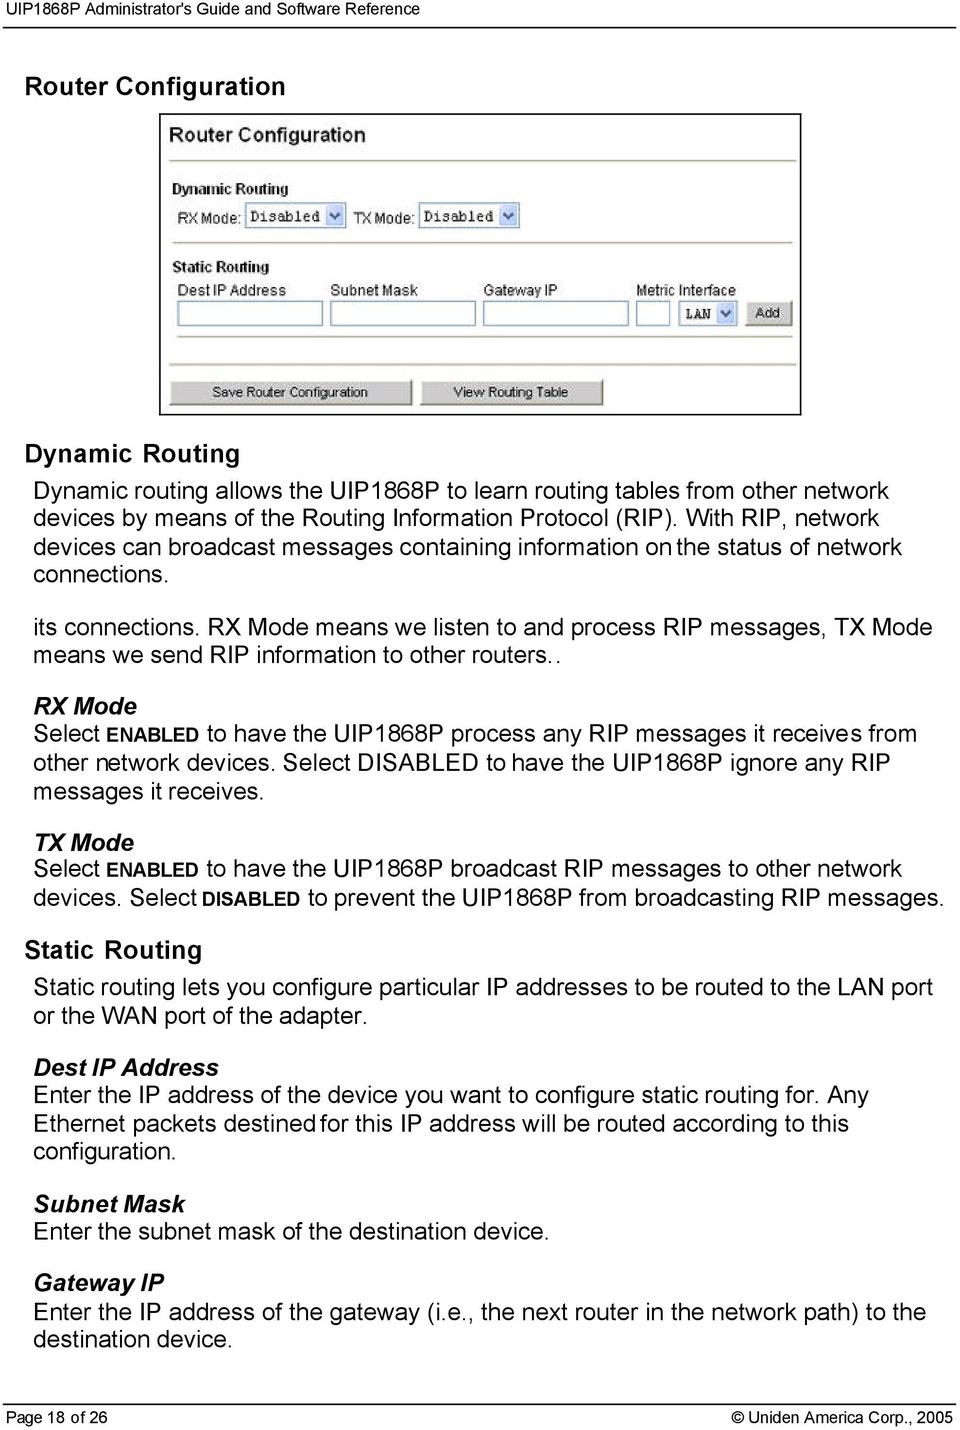 RX Mode means we listen to and process RIP messages, TX Mode means we send RIP information to other routers.